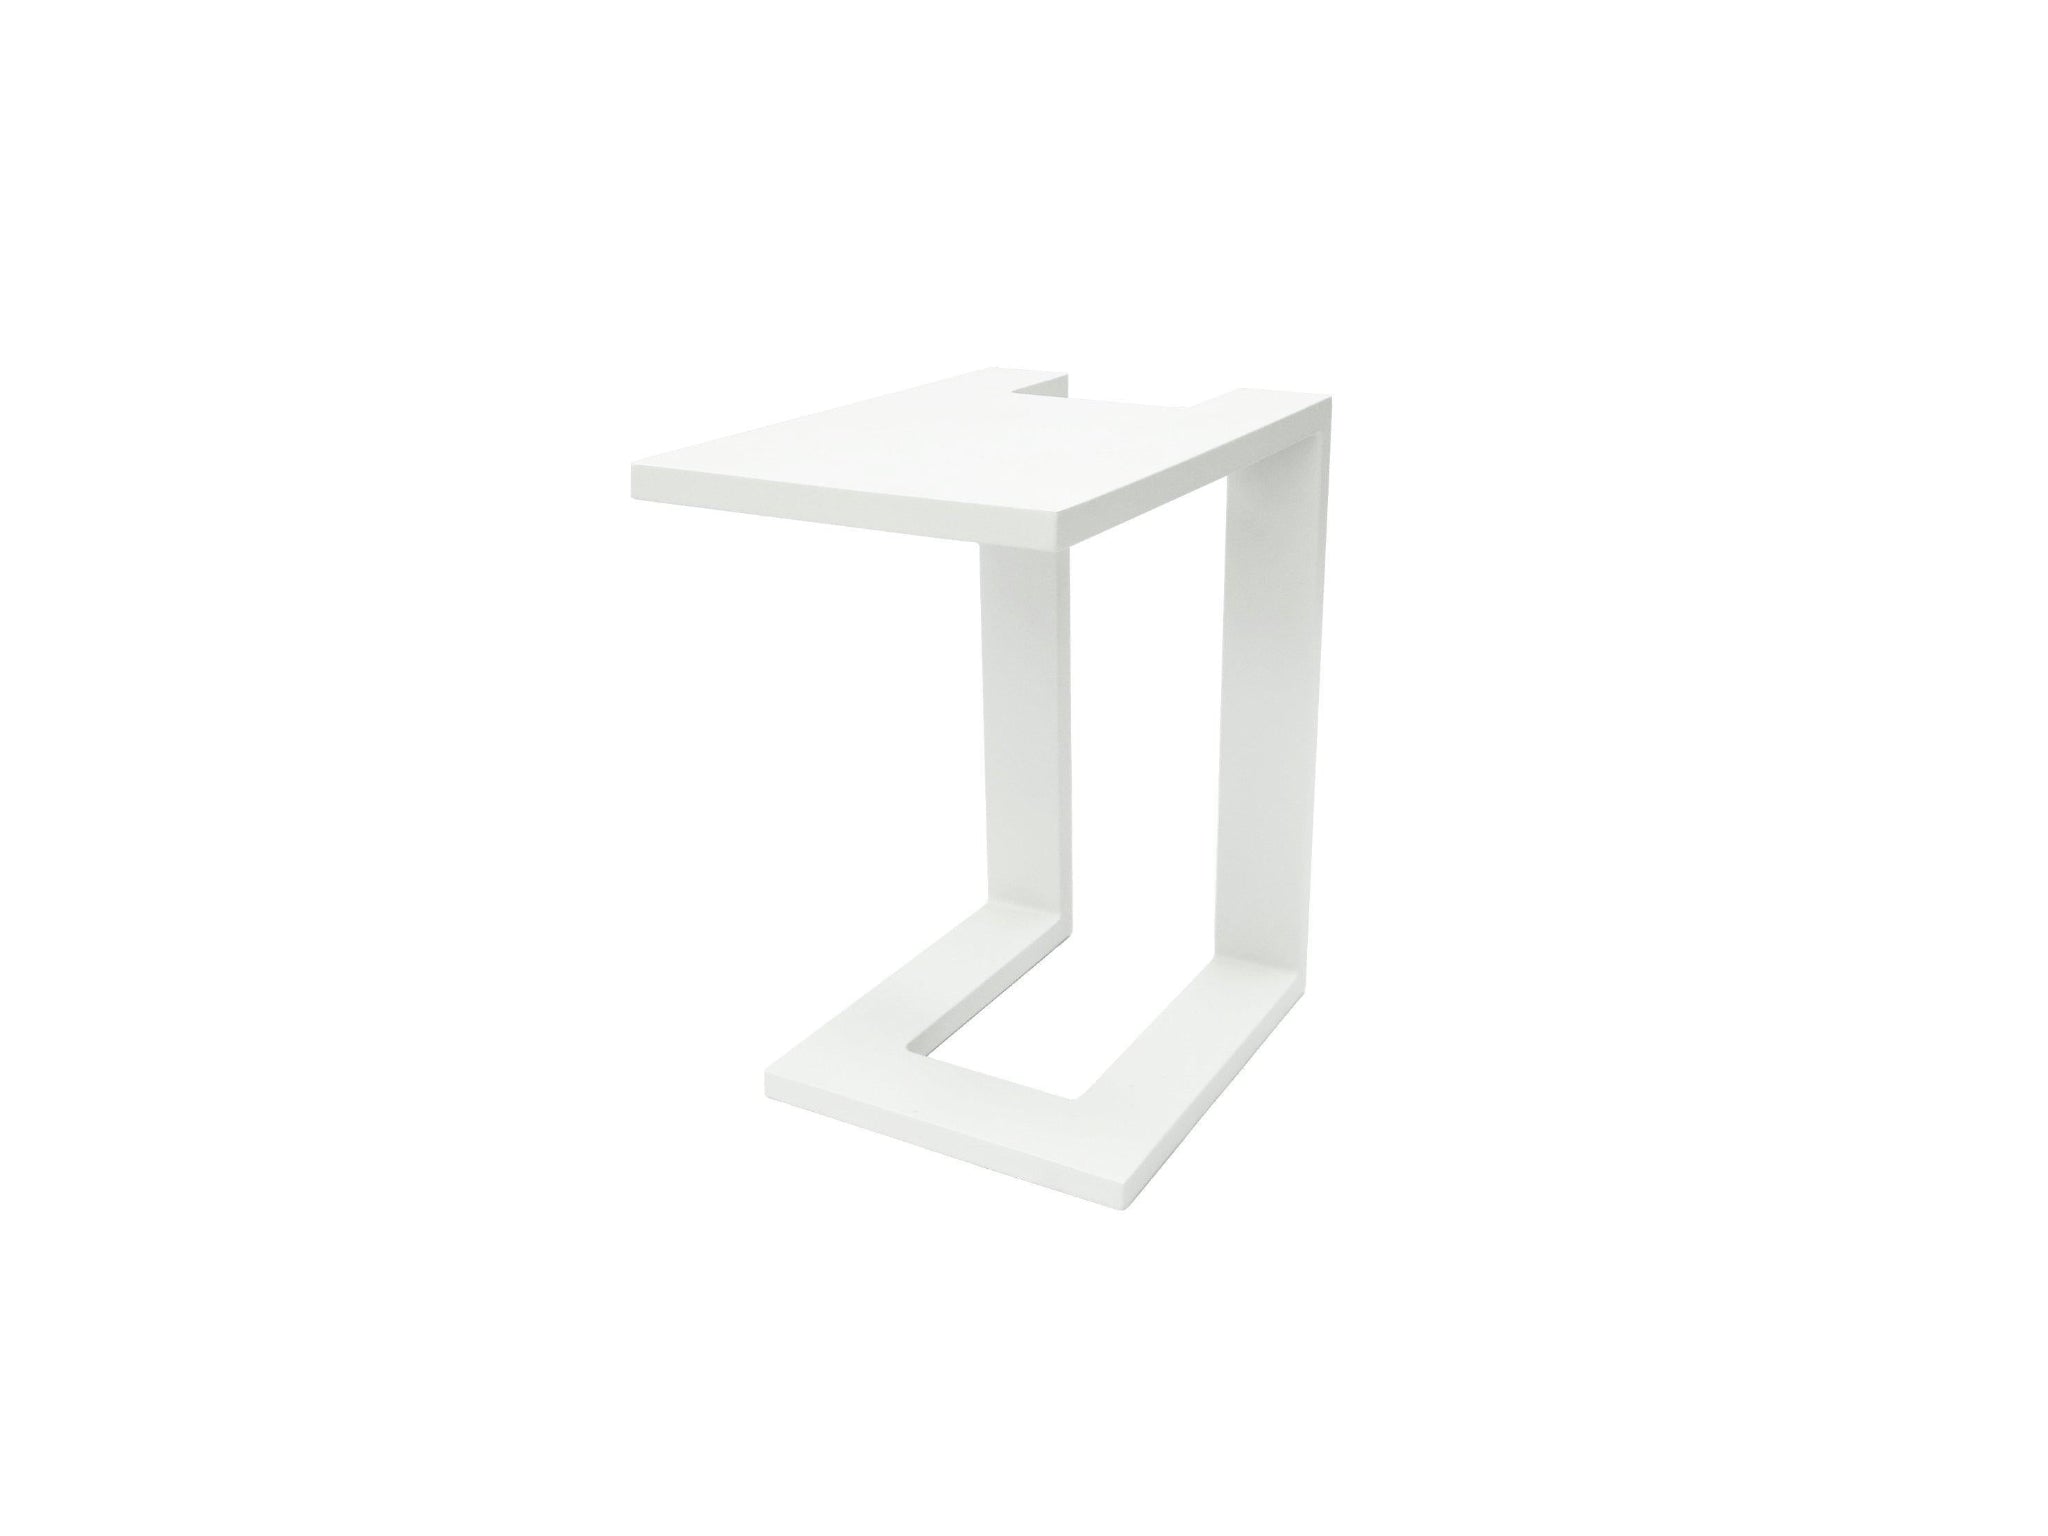 Sunlongarden Manly Side Table